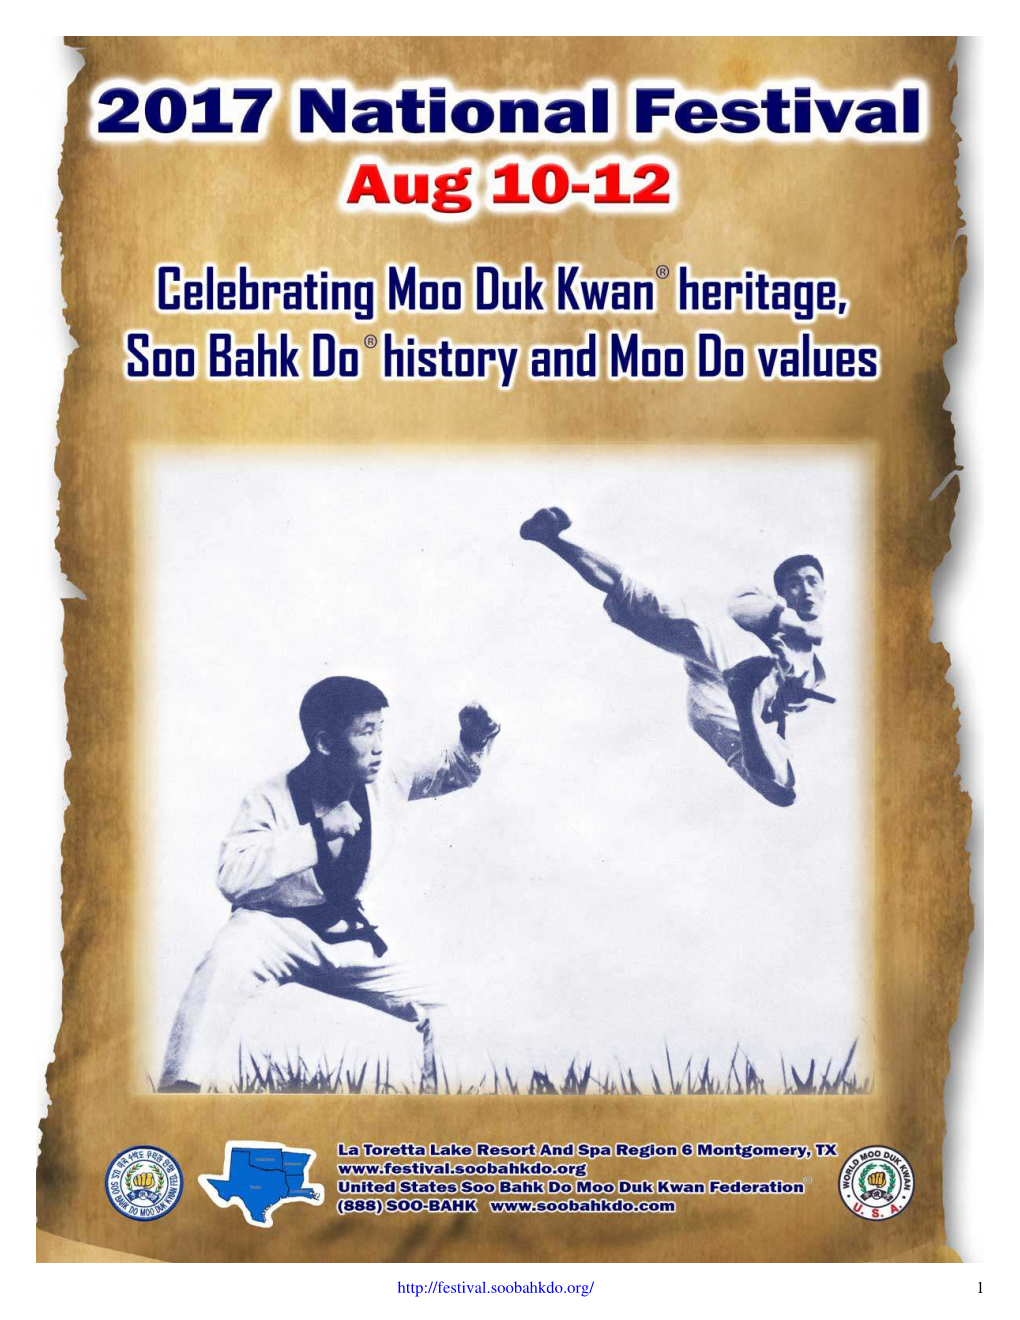 Moo Duk Kwan® Heritage Discounted $129 Group Rate Available